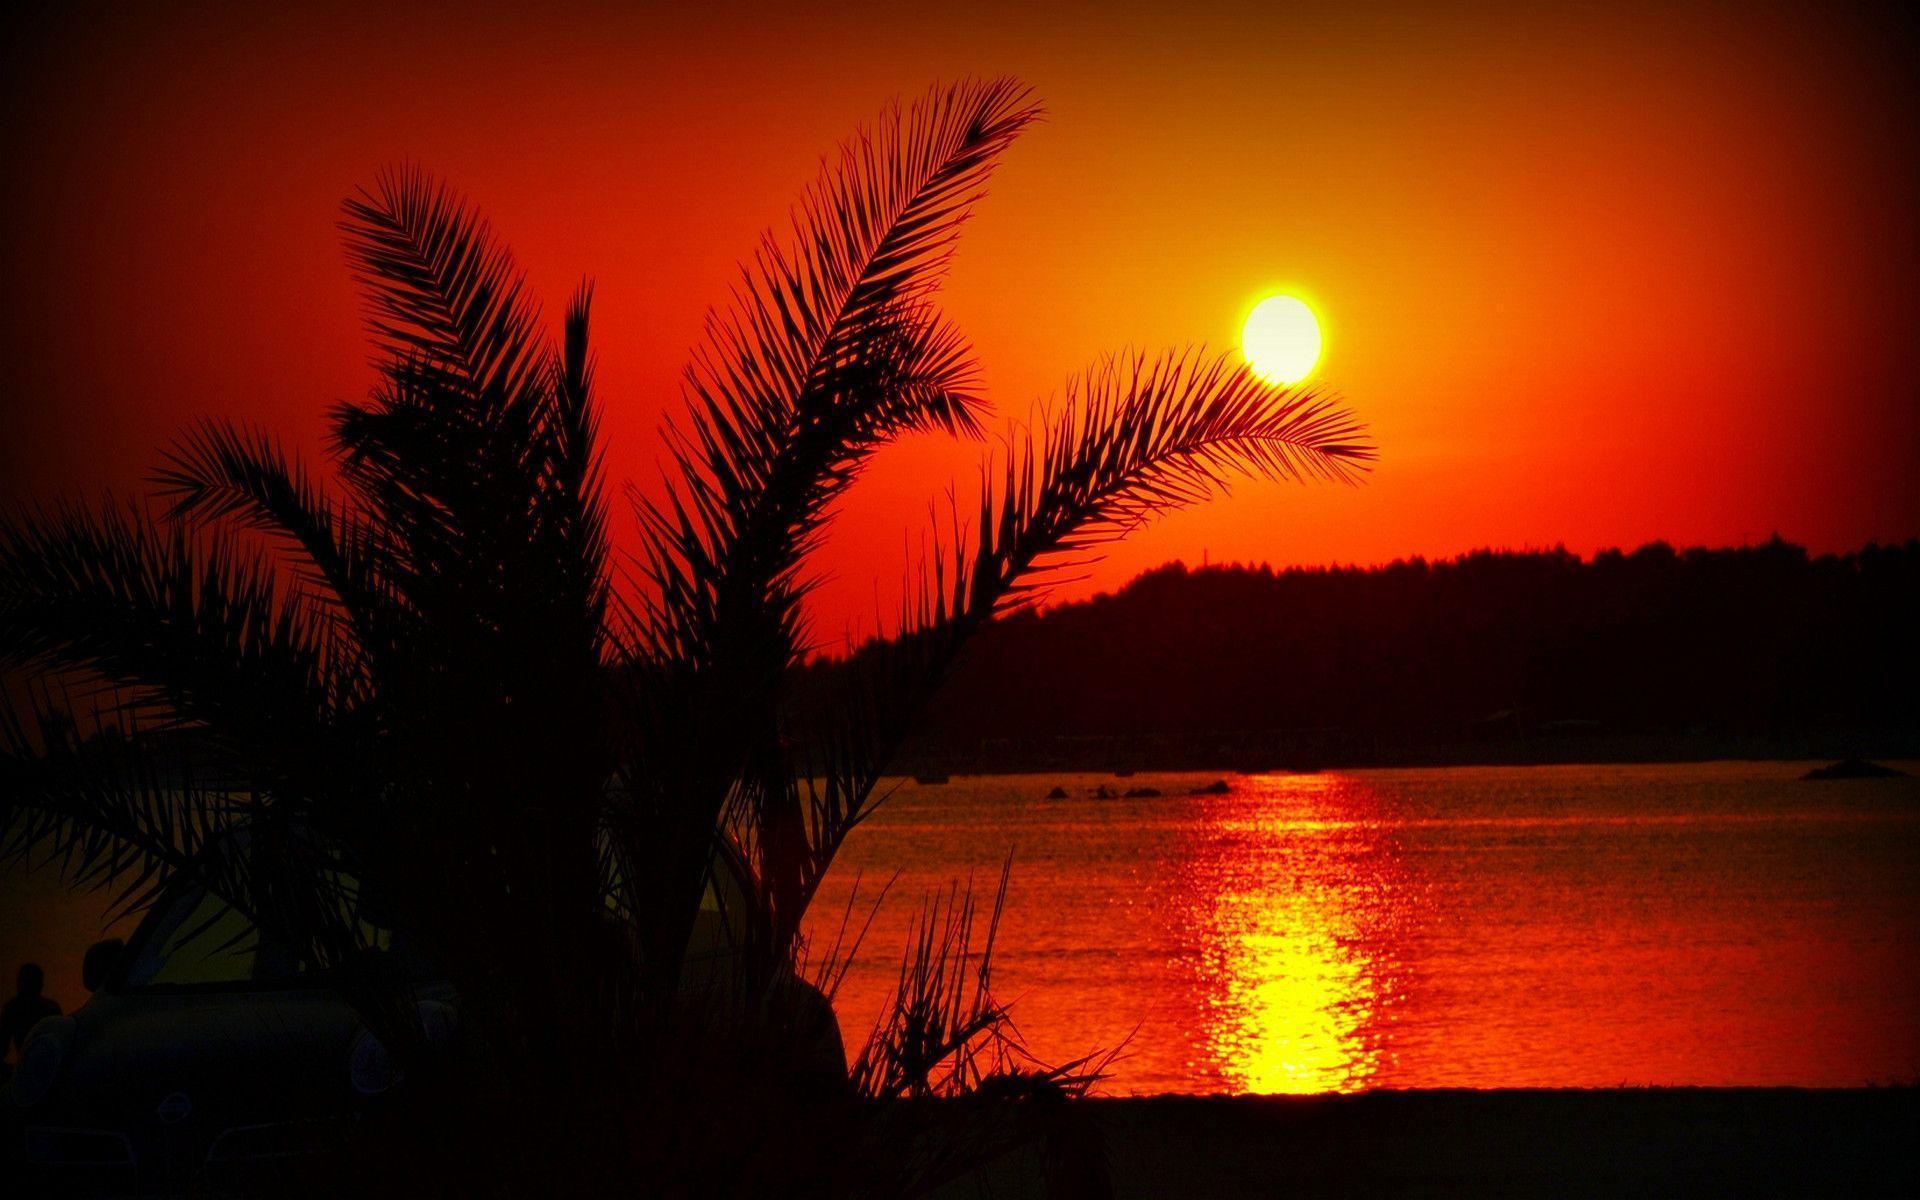 Summer Sunset Wallpaper Hq Image 12 HD Wallpaper. Hdimges